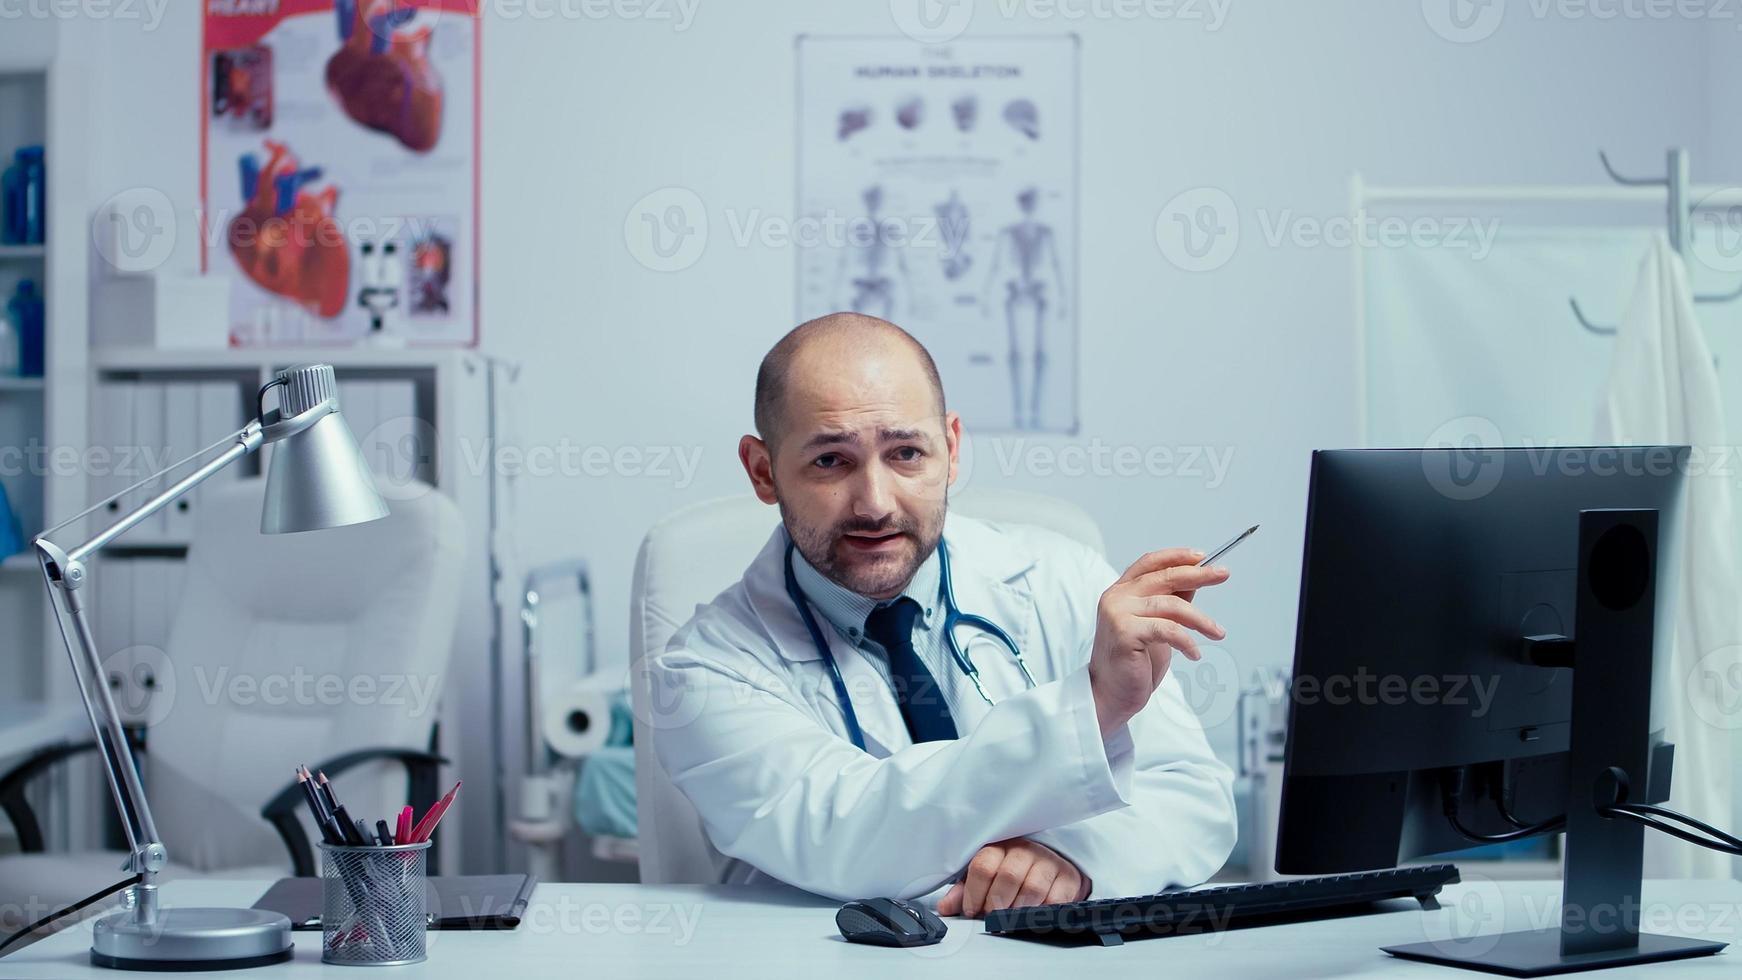 Young physician offering internet medical advice photo